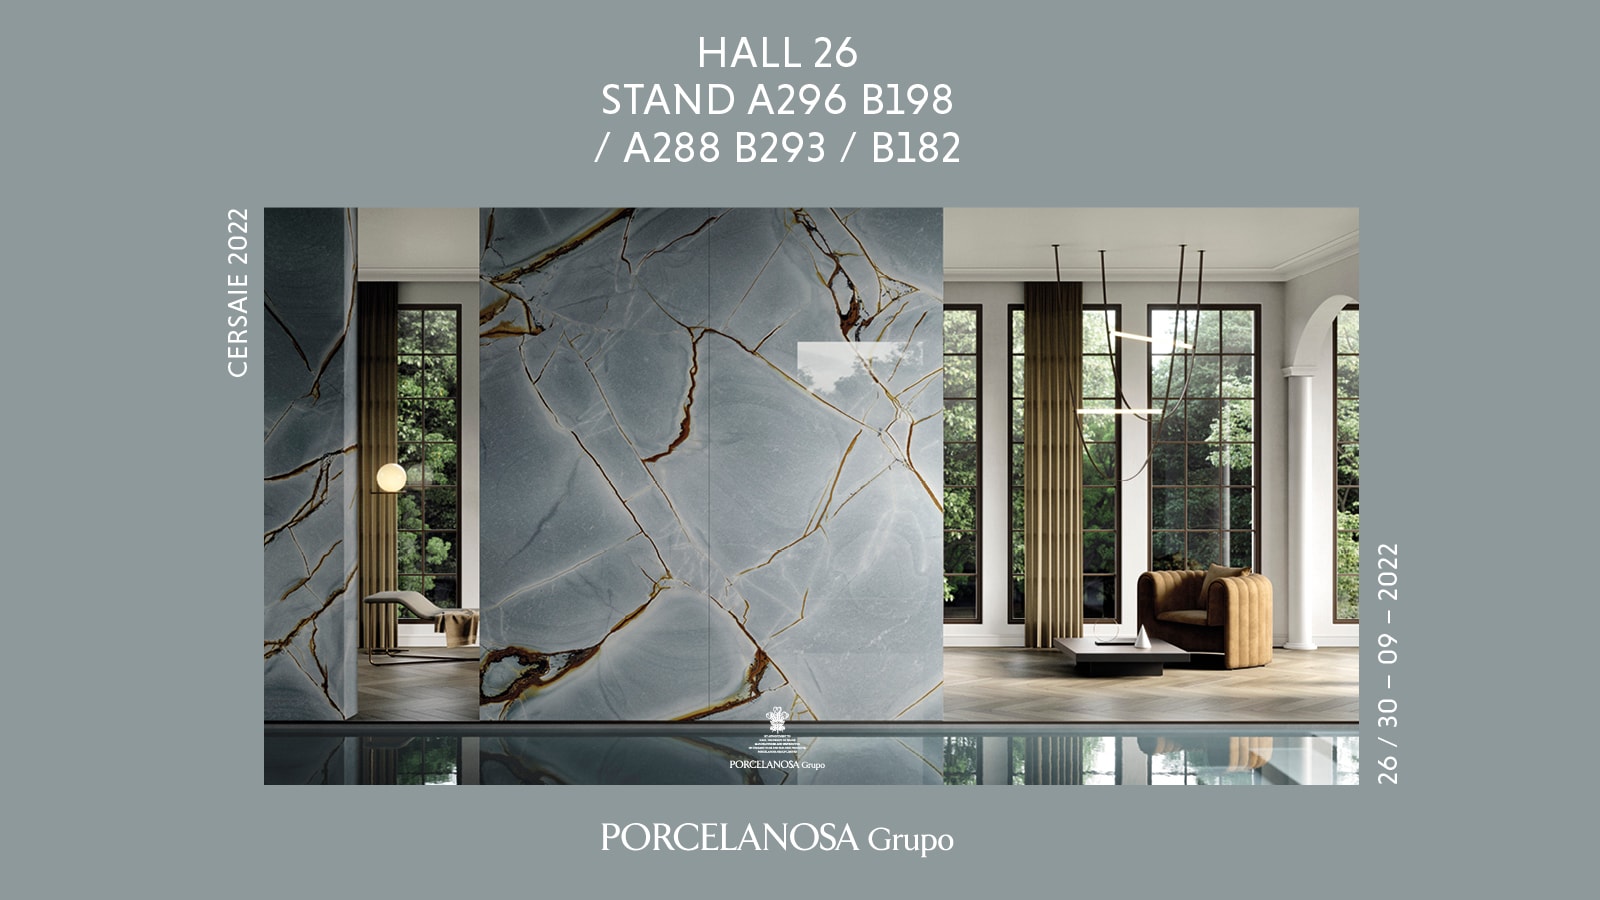 PORCELANOSA Group presents its latest innovations at Cersaie 2022